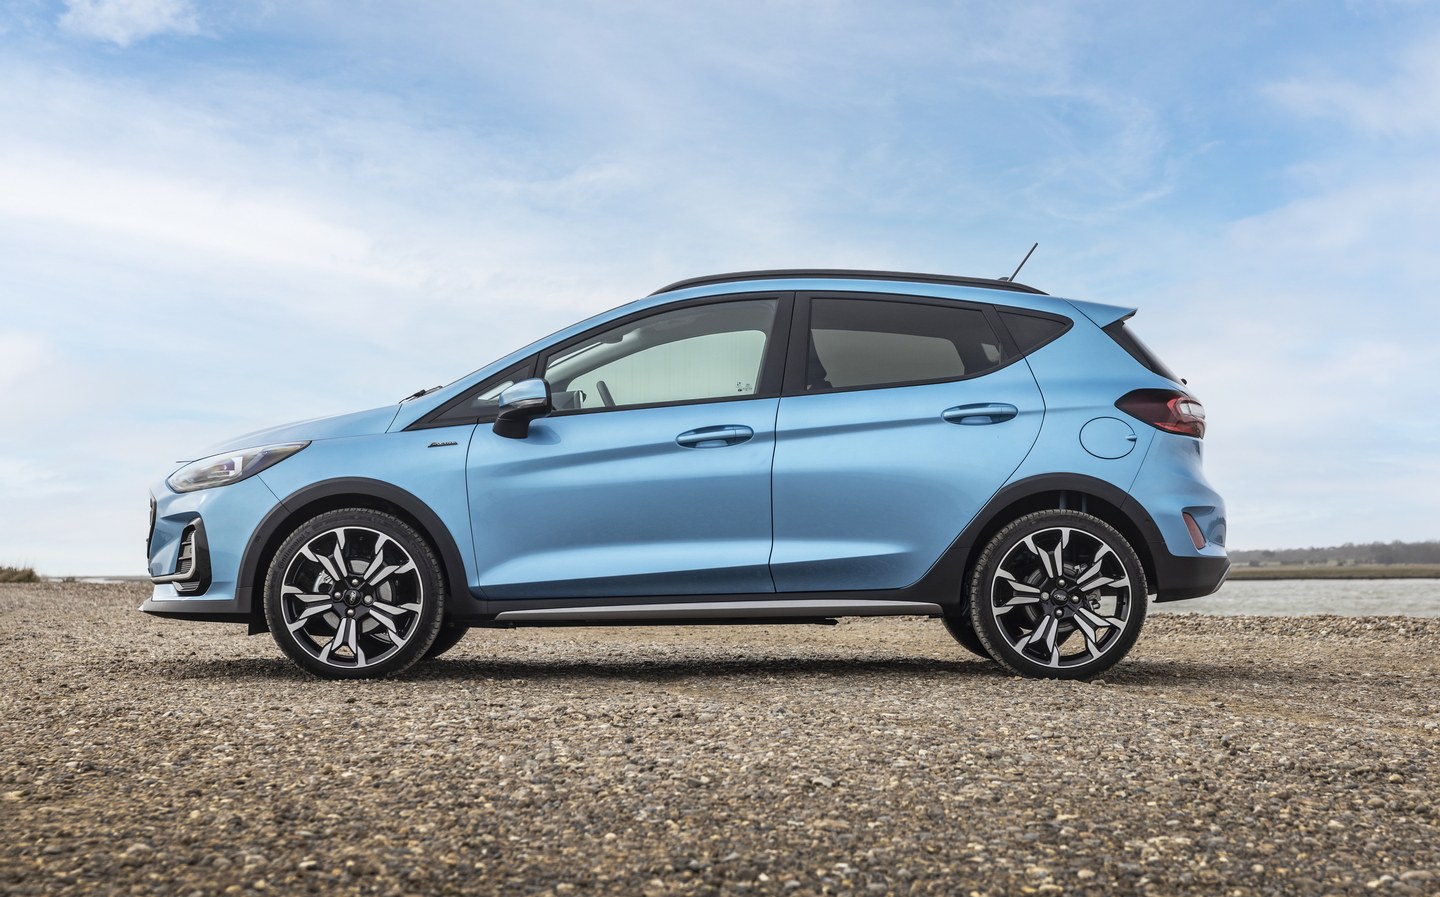 Next Generation Ford Fiesta – World's Most Technologically